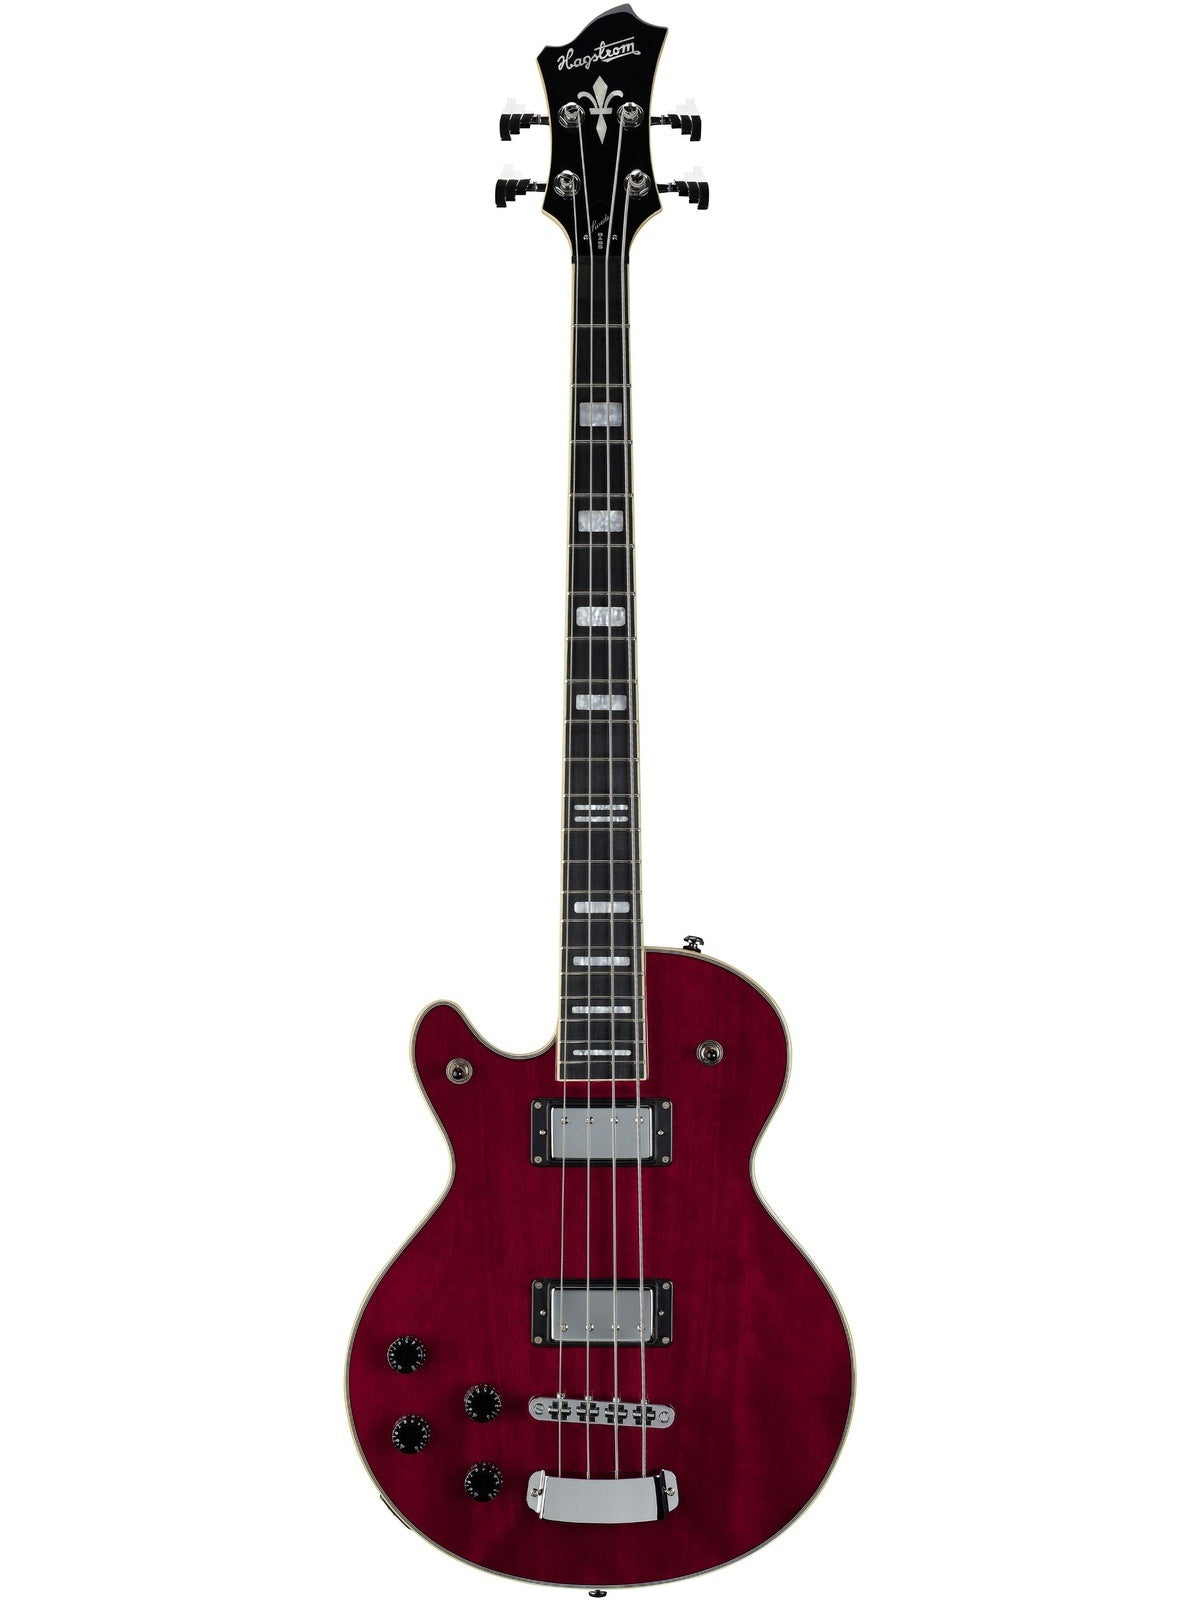 Hagstrom Swede Bass Left-Handed 4-String Electric Bass, Wild Cherry Transparent